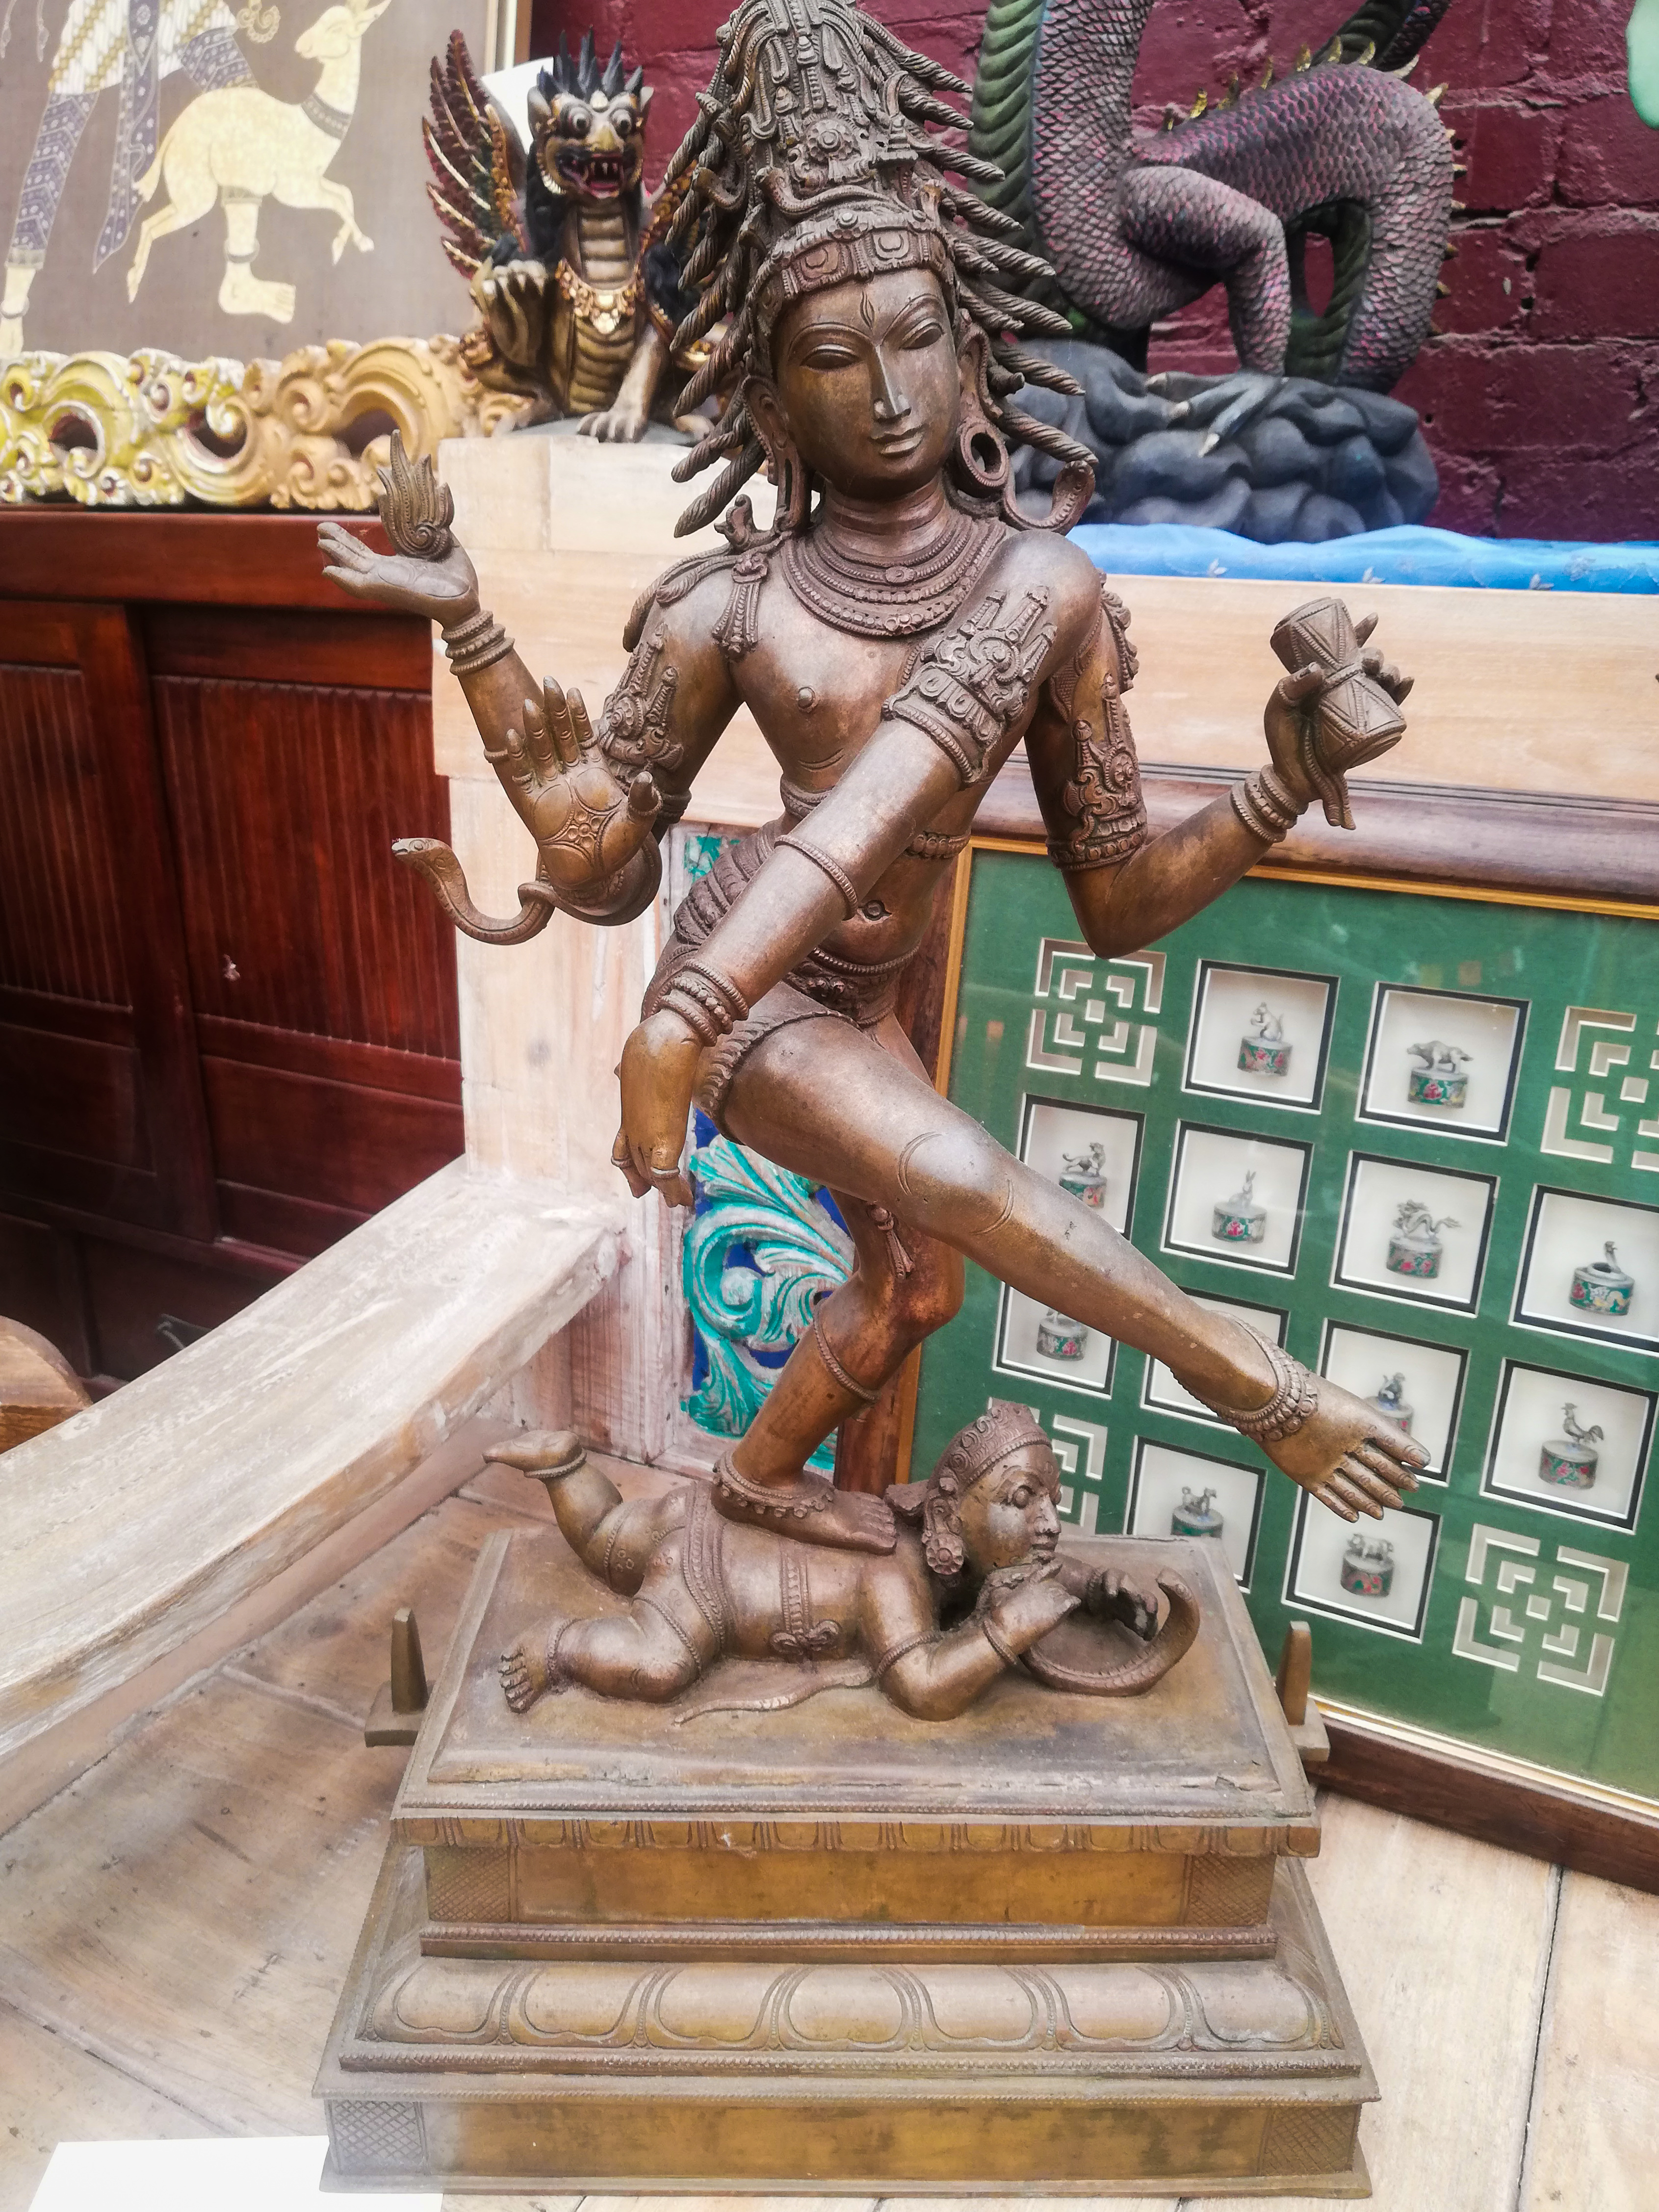 Nataraja, Shiva Lord of Cosmic Ecstatic Dance <br> Triple role is Creator, Preserver and Destroyer